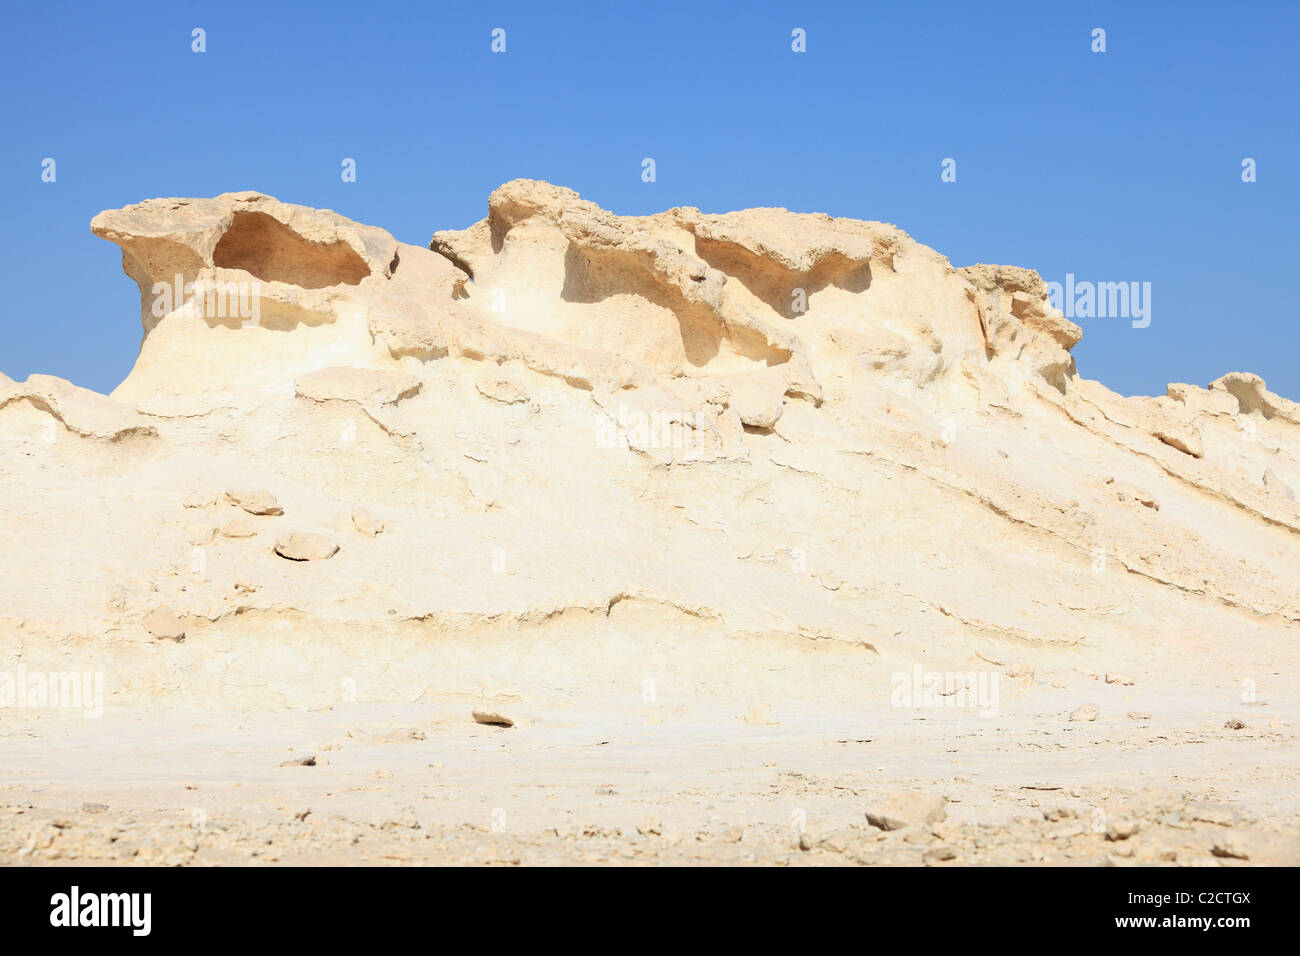 Eroding jebels (mesas) in south-west Qatar, Arabia The calcareous marl acts as a weak cap-rock. Stock Photo